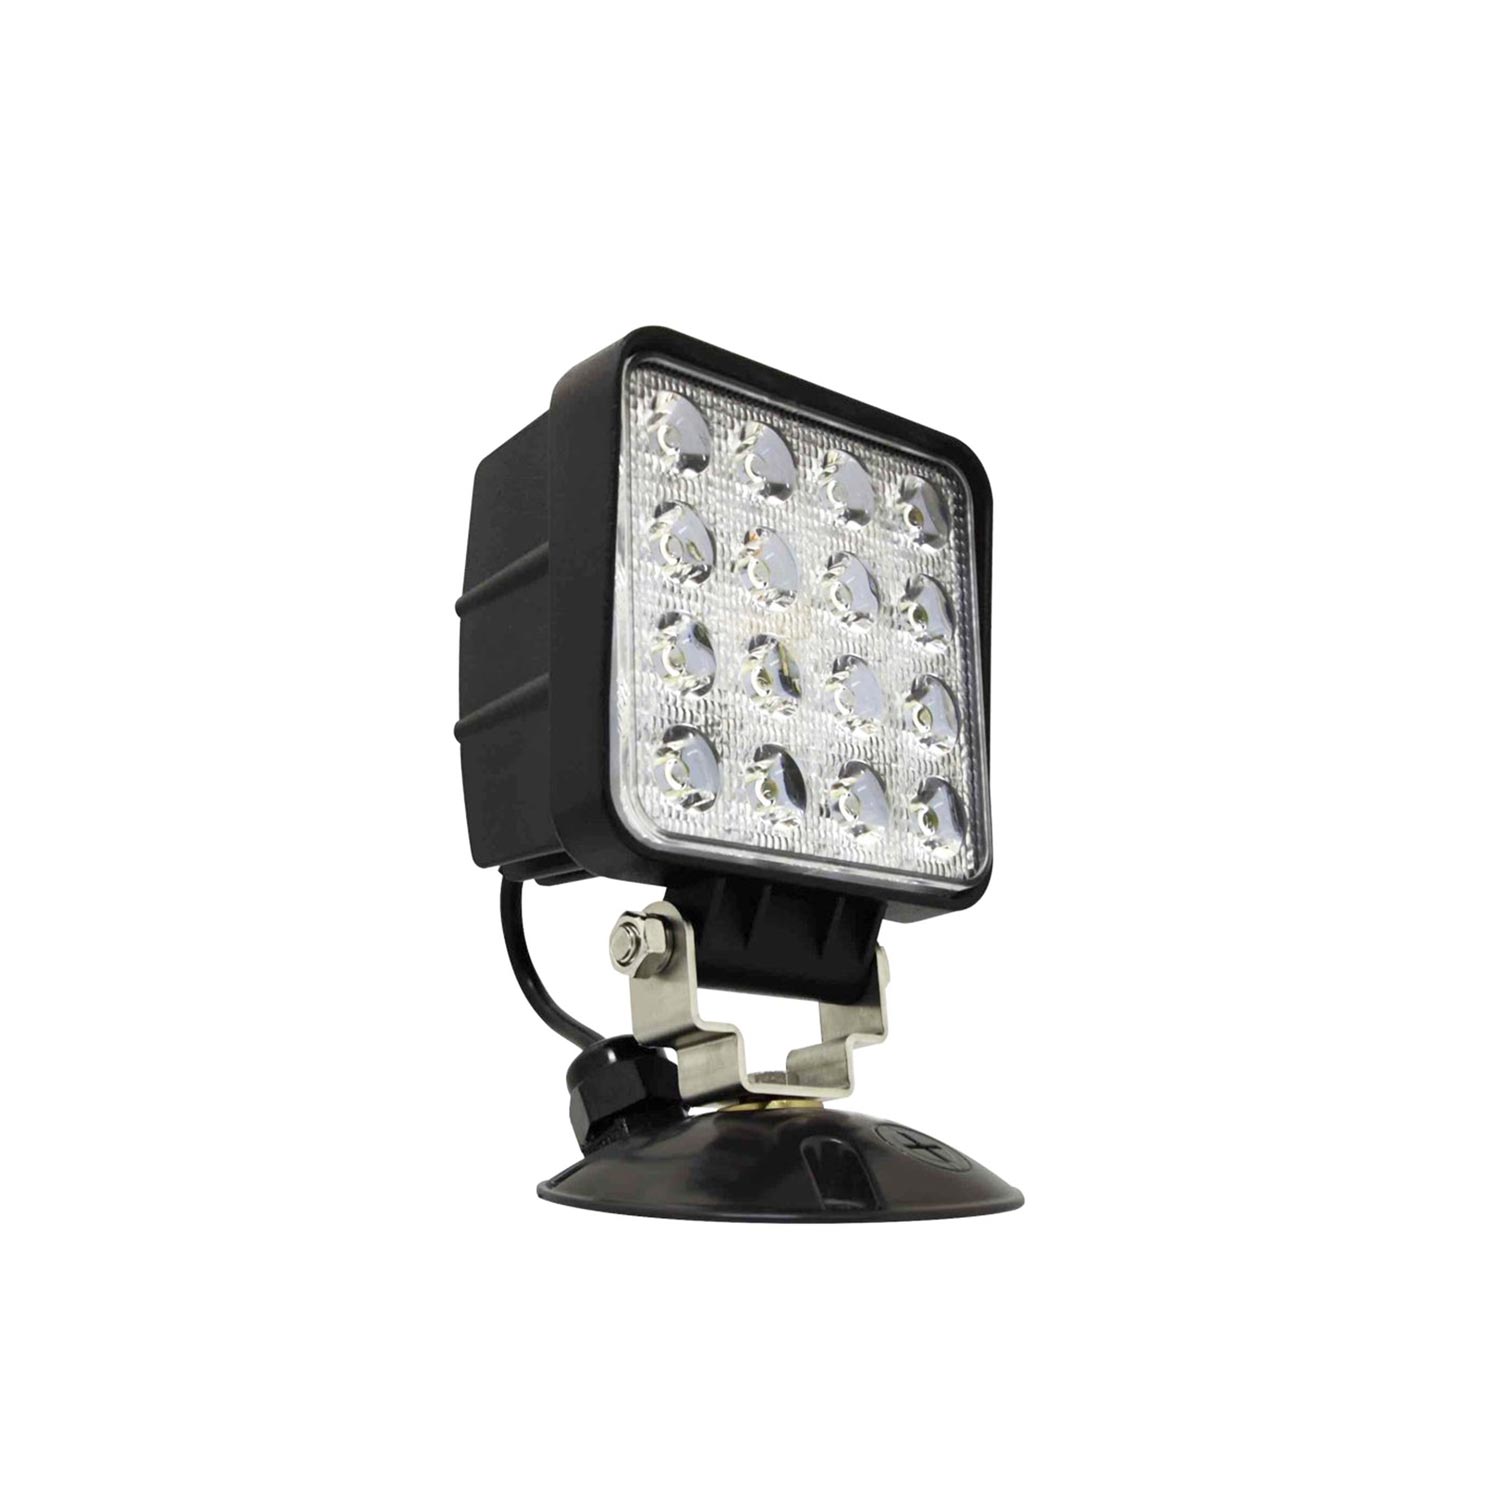 High Output, NEMA 4X Rated Remote Emergency Light Head that provides up to 2328 lumens per head. The Isolite HNS.